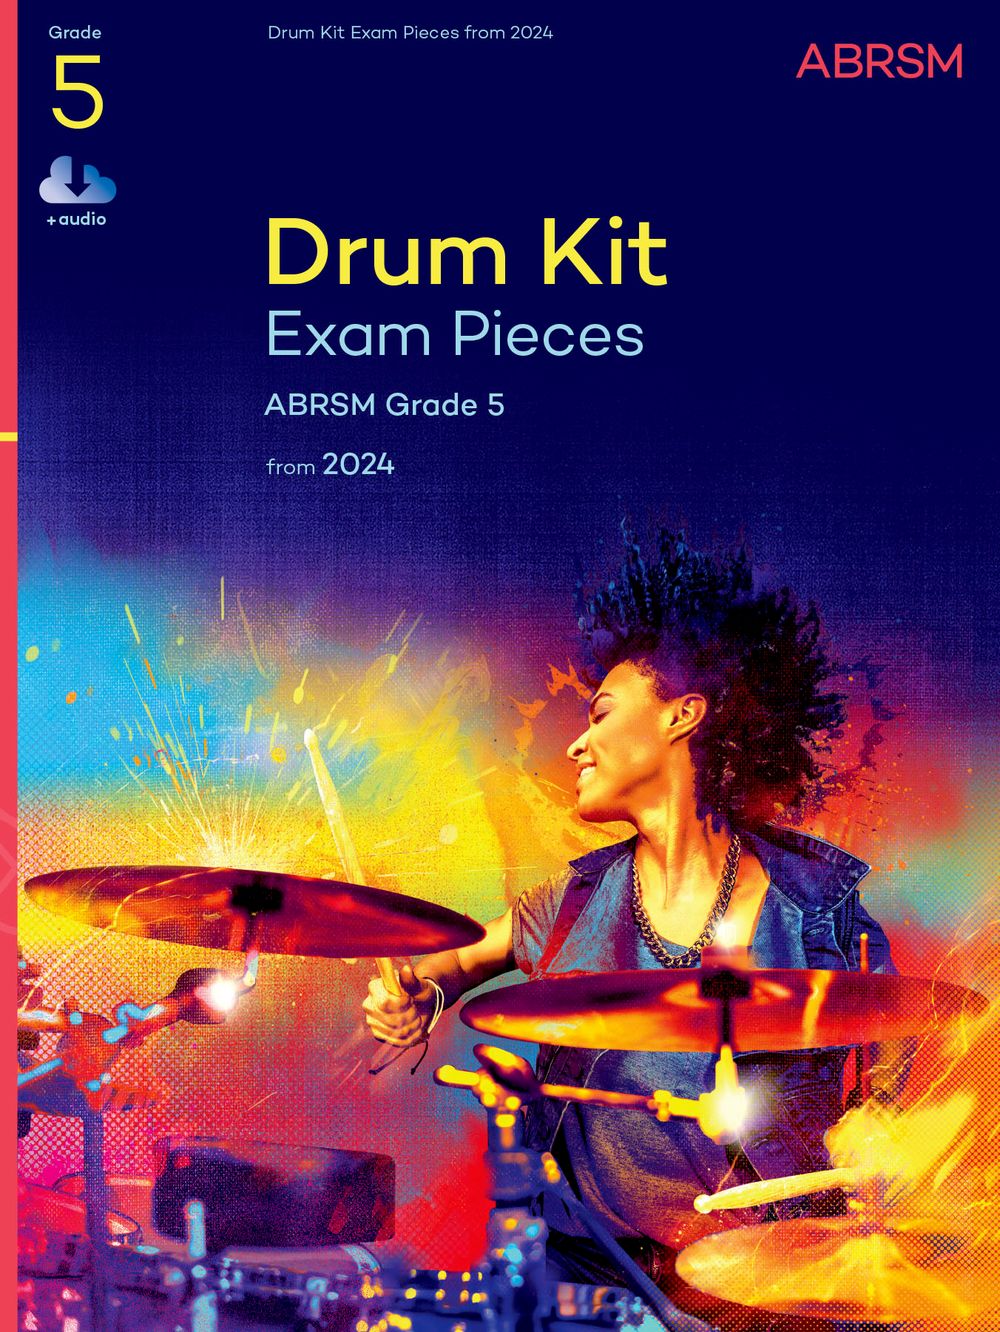 Drum Kit Exam Pieces From 2024 Grade 5 Abrsm Sheet Music Songbook